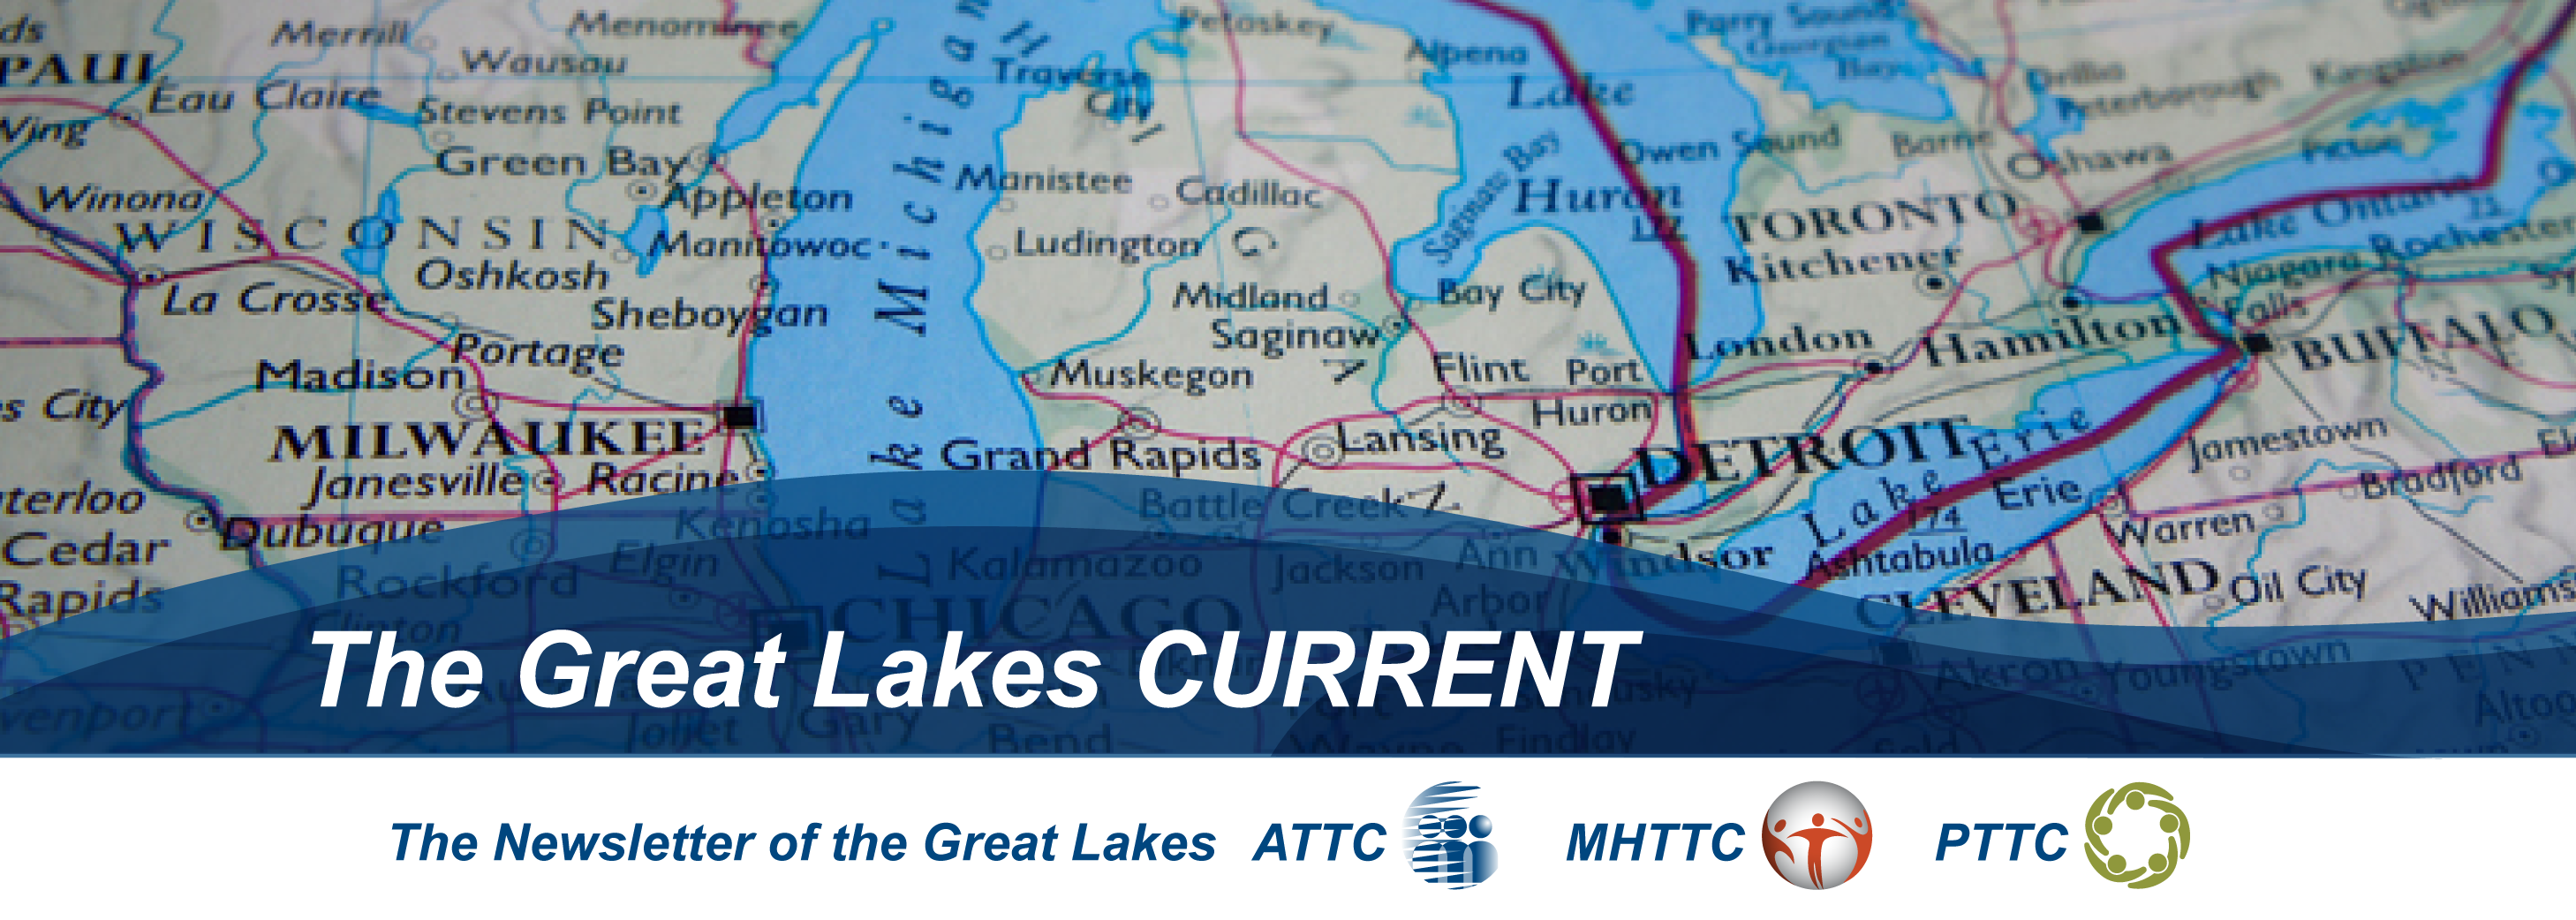 Great Lakes Current logo